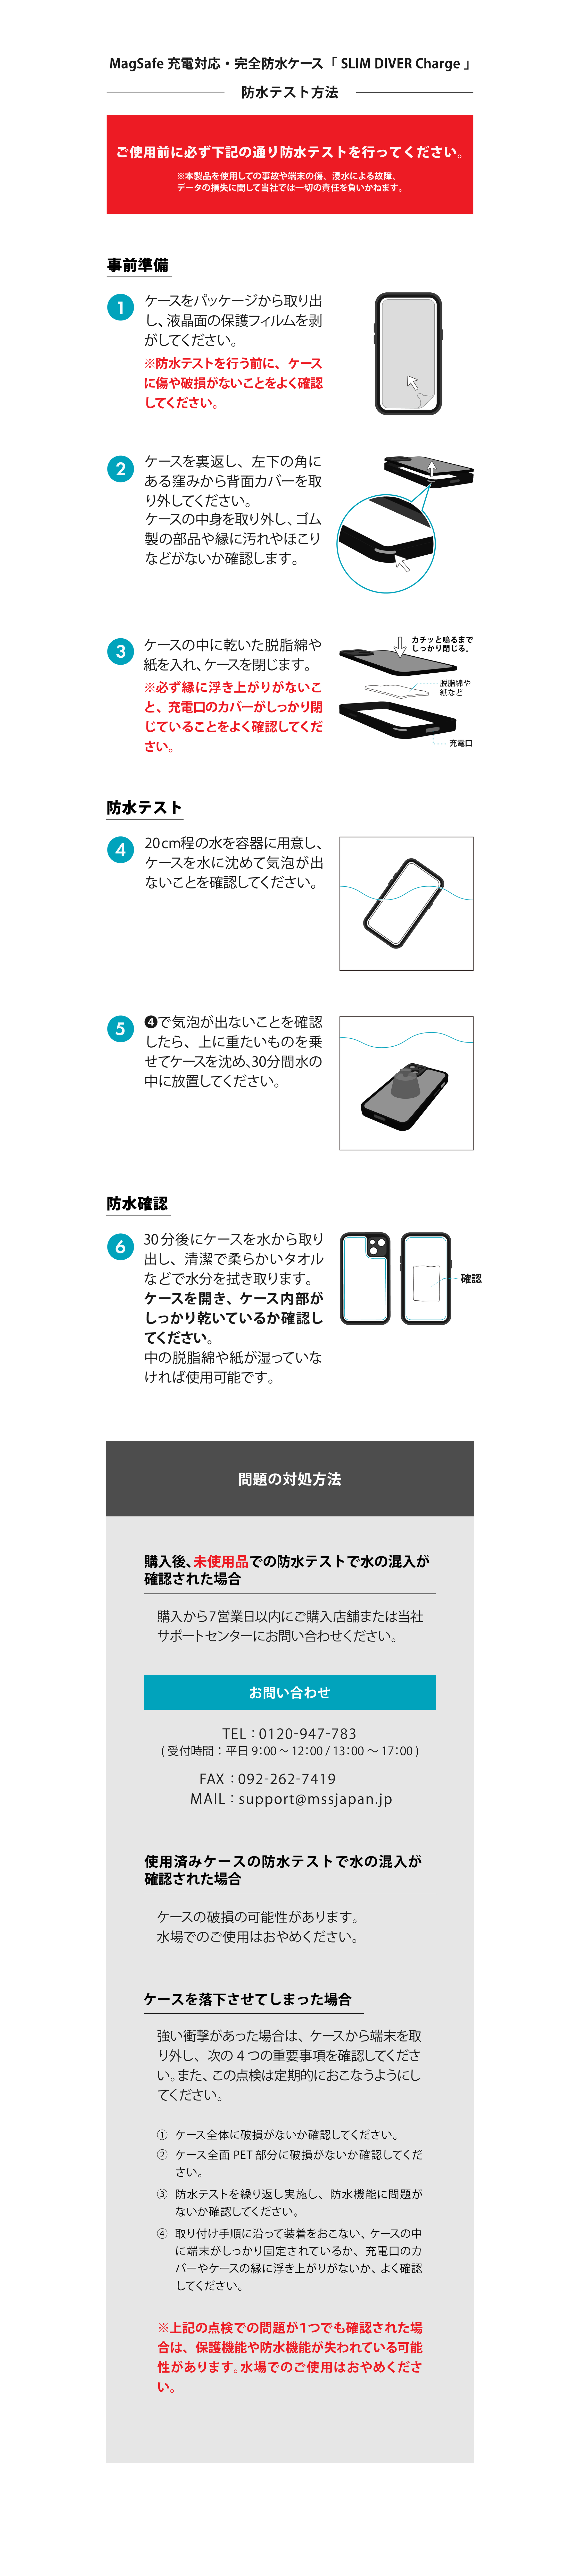 SLIM DIVER Charge防水テスト